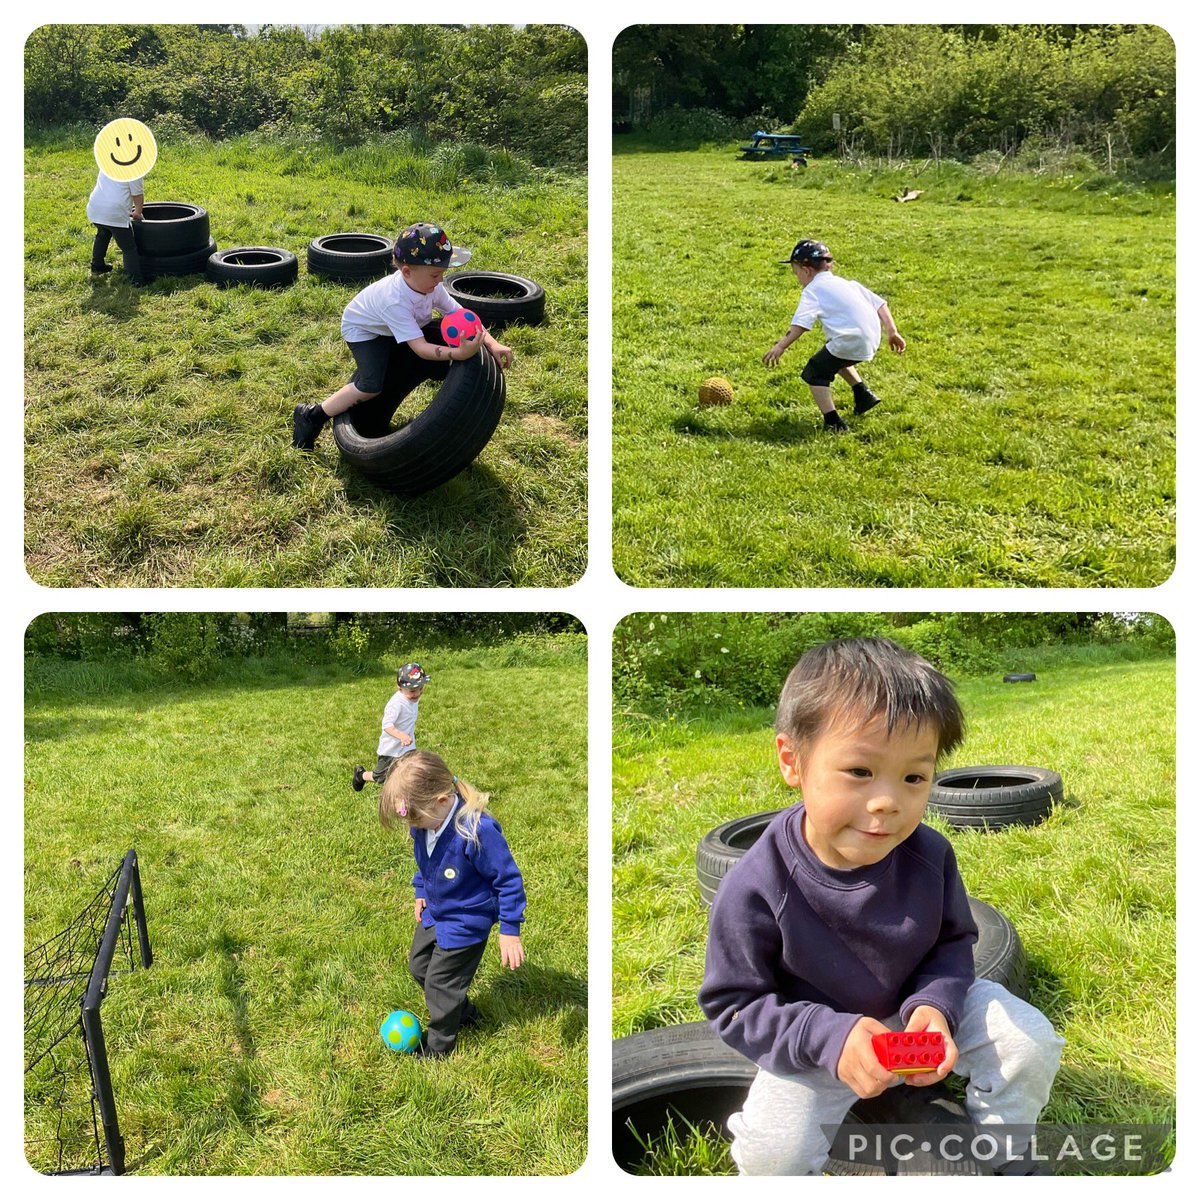 The Rabbits taking every opportunity to have fun in the sun!#healthybodieshealthyminds #eyfs #physicaldevelopment #jtmat #ballskills